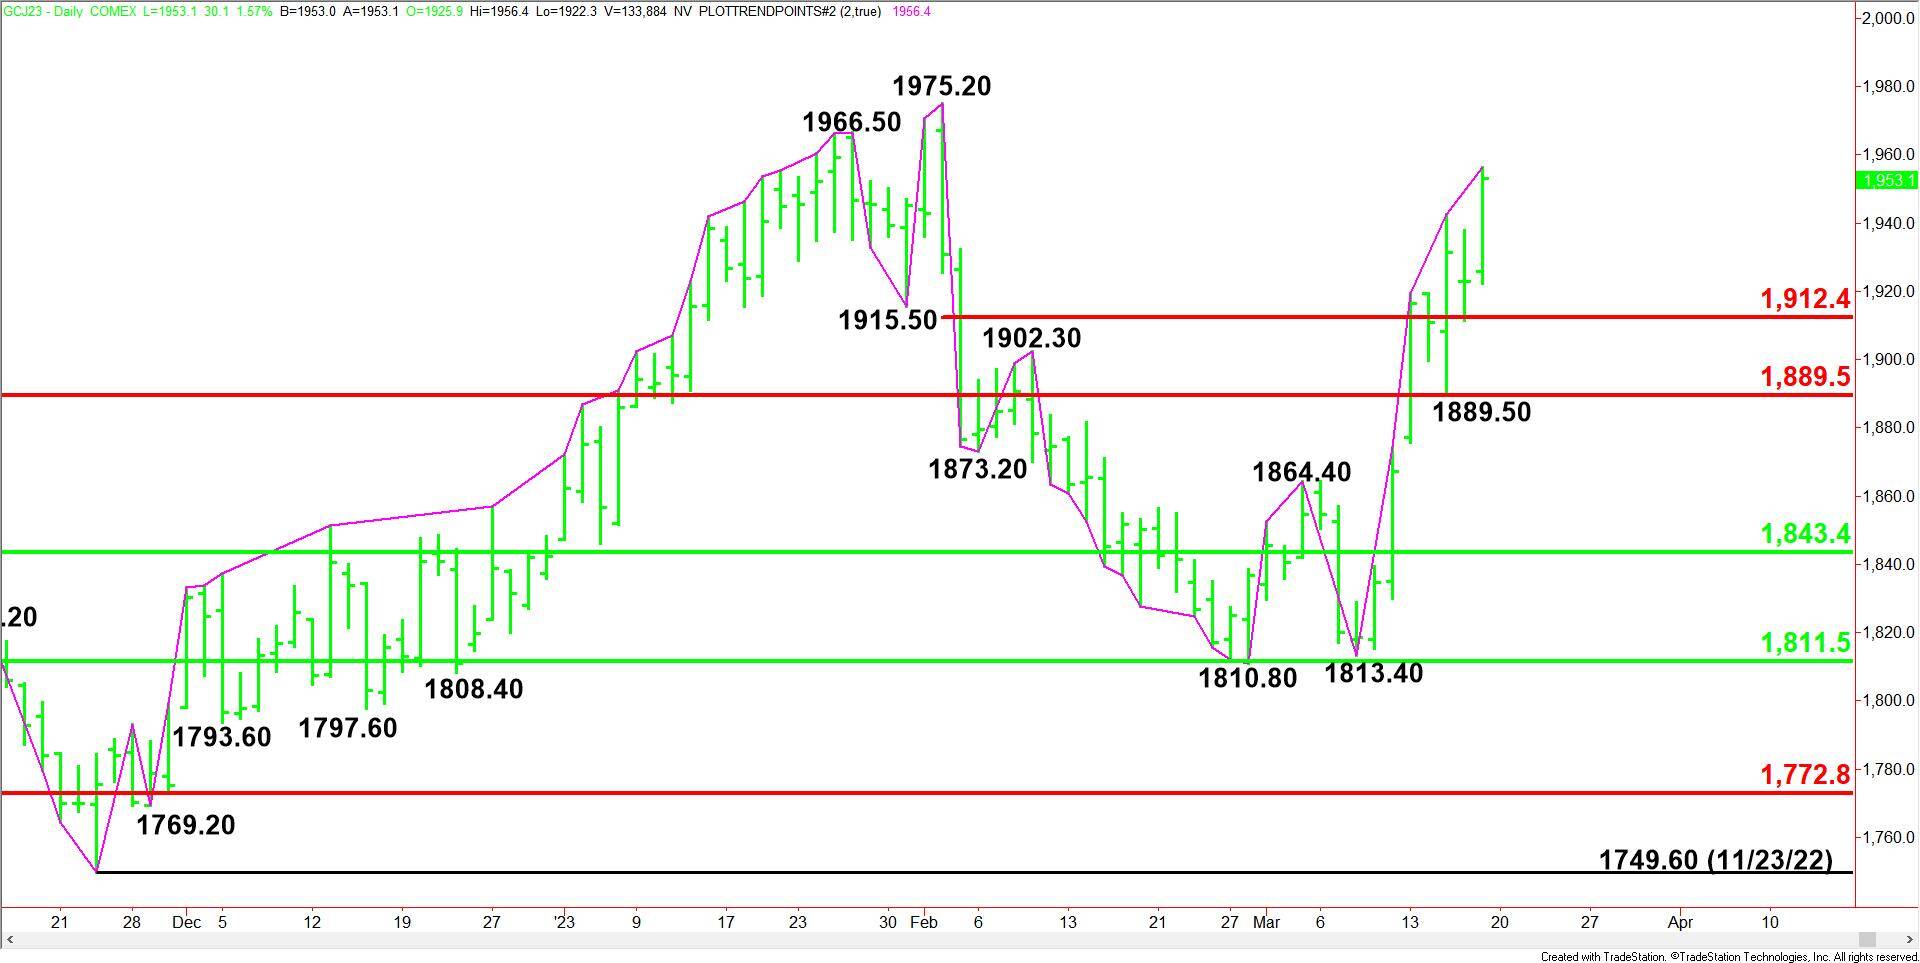 Daily April Comex Gold